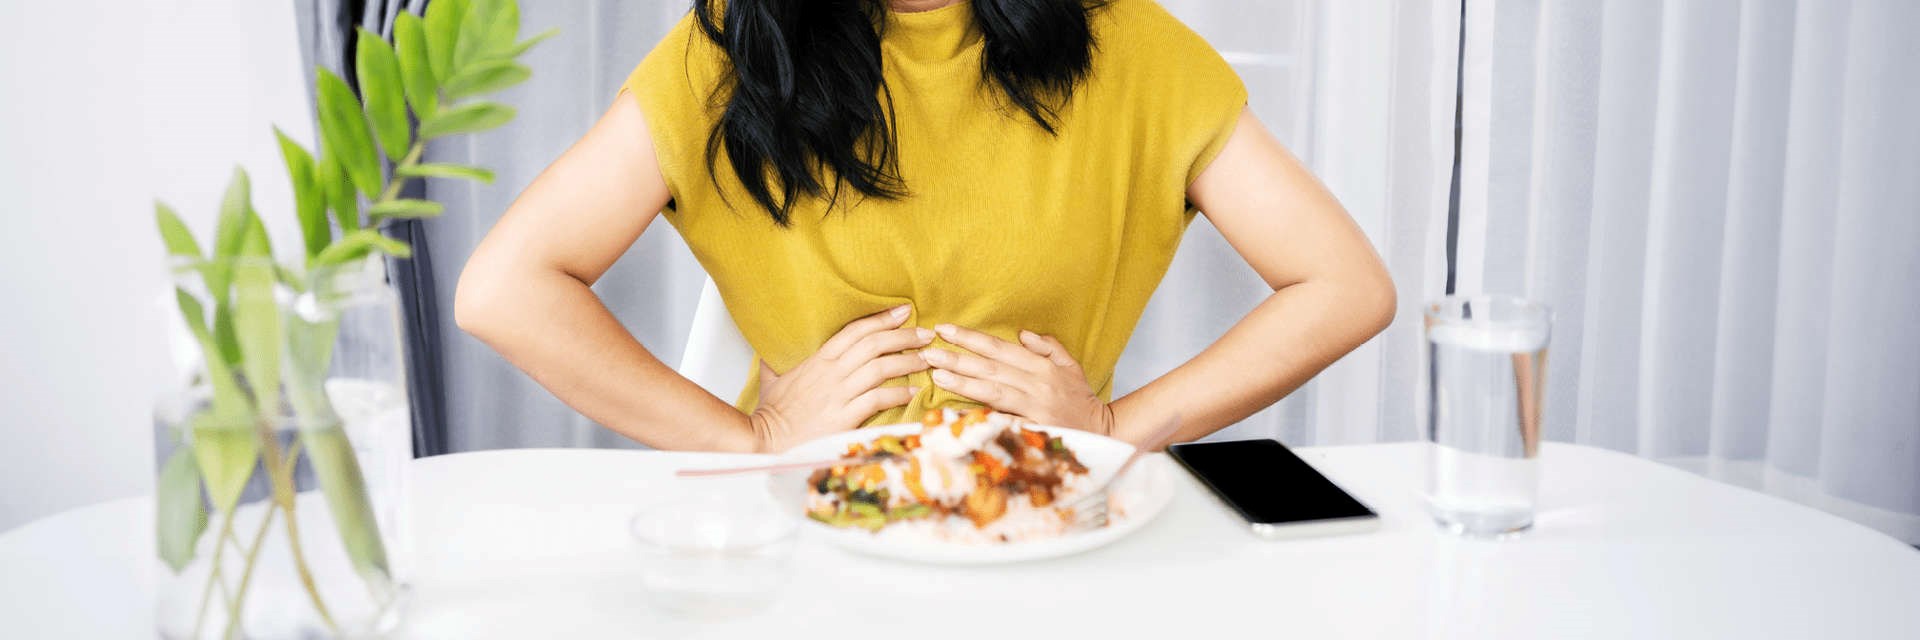 Woman eating a meal holding her stomach in discomfort